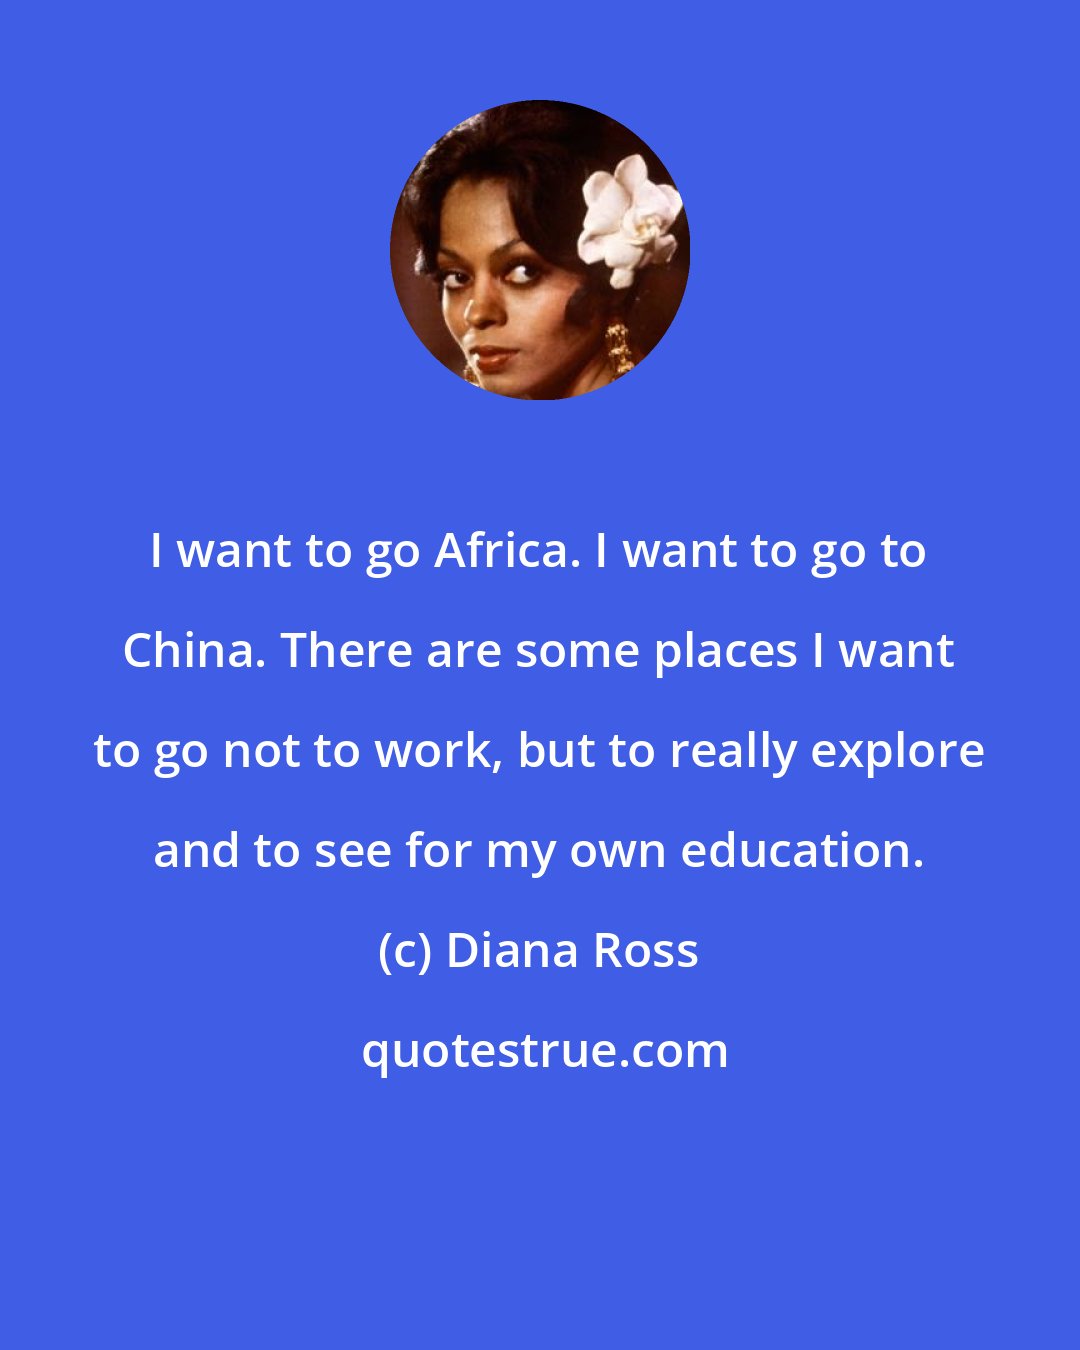 Diana Ross: I want to go Africa. I want to go to China. There are some places I want to go not to work, but to really explore and to see for my own education.